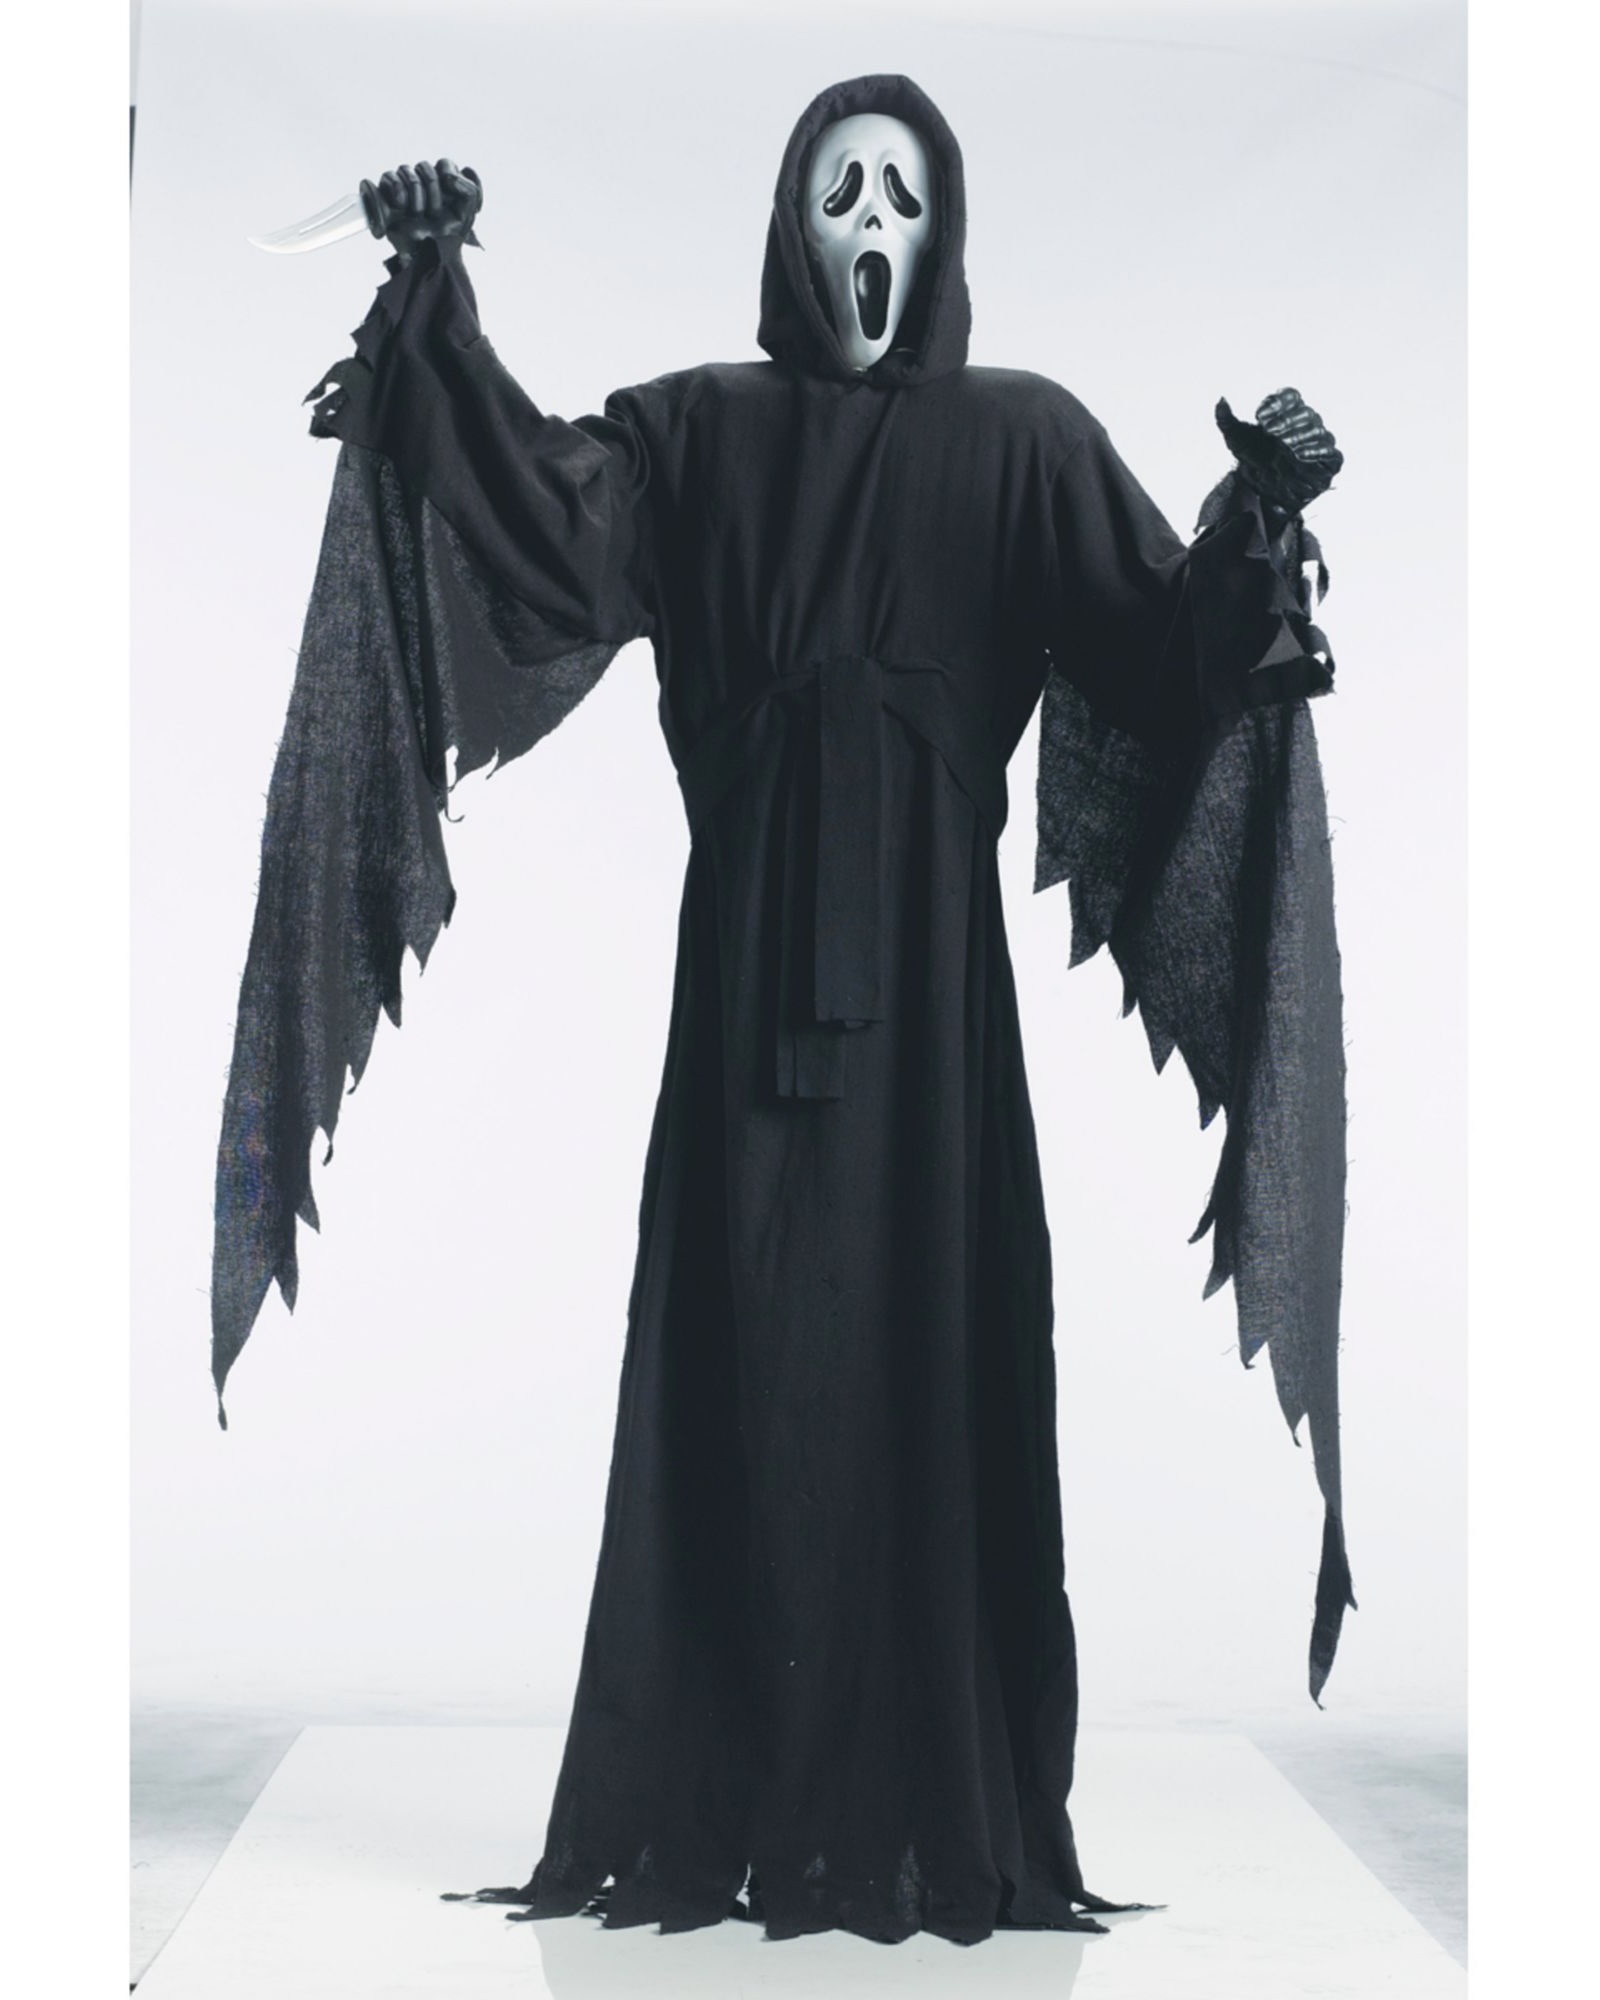 Standing 6 Foot Licensed Ghost Face Prop